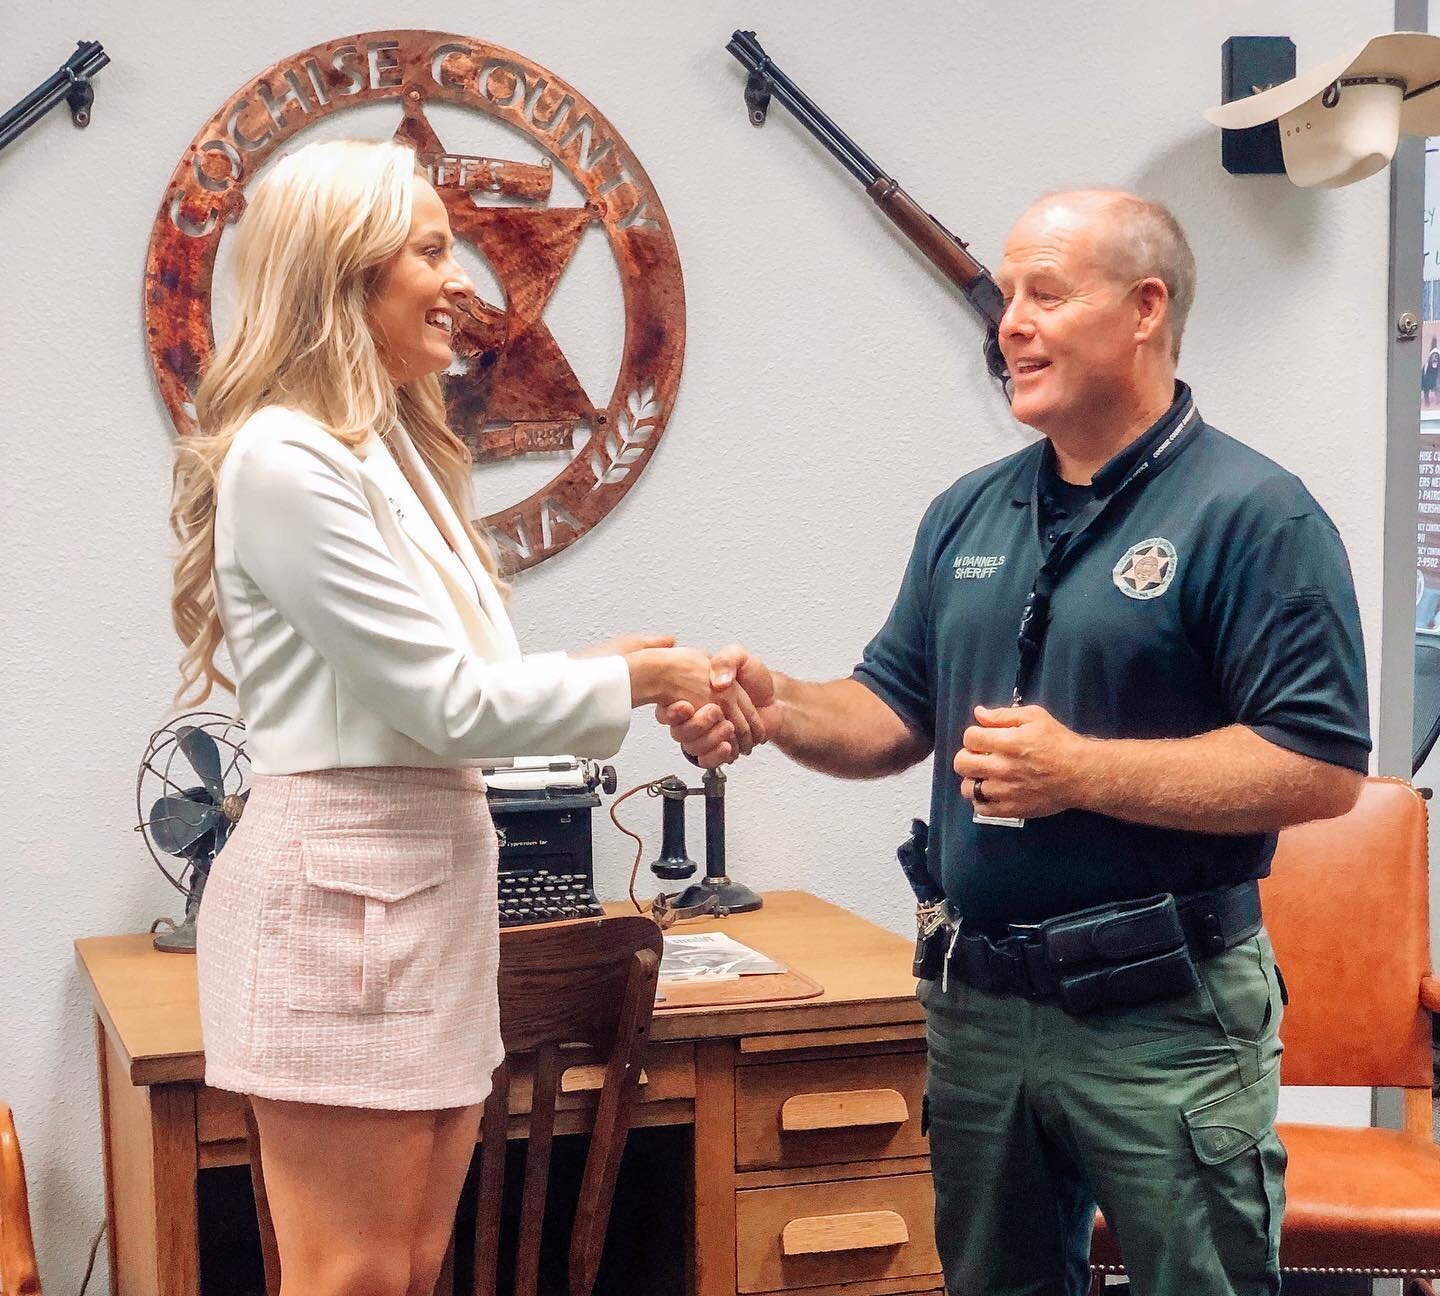 What a fantastic day! Thank you to all of Cochise County for welcoming me with open arms today and letting me explore your town! Here are all the things I got to do today! 

1. Ride along with the sheriff of Cochise county, Mark Dannels and visit his